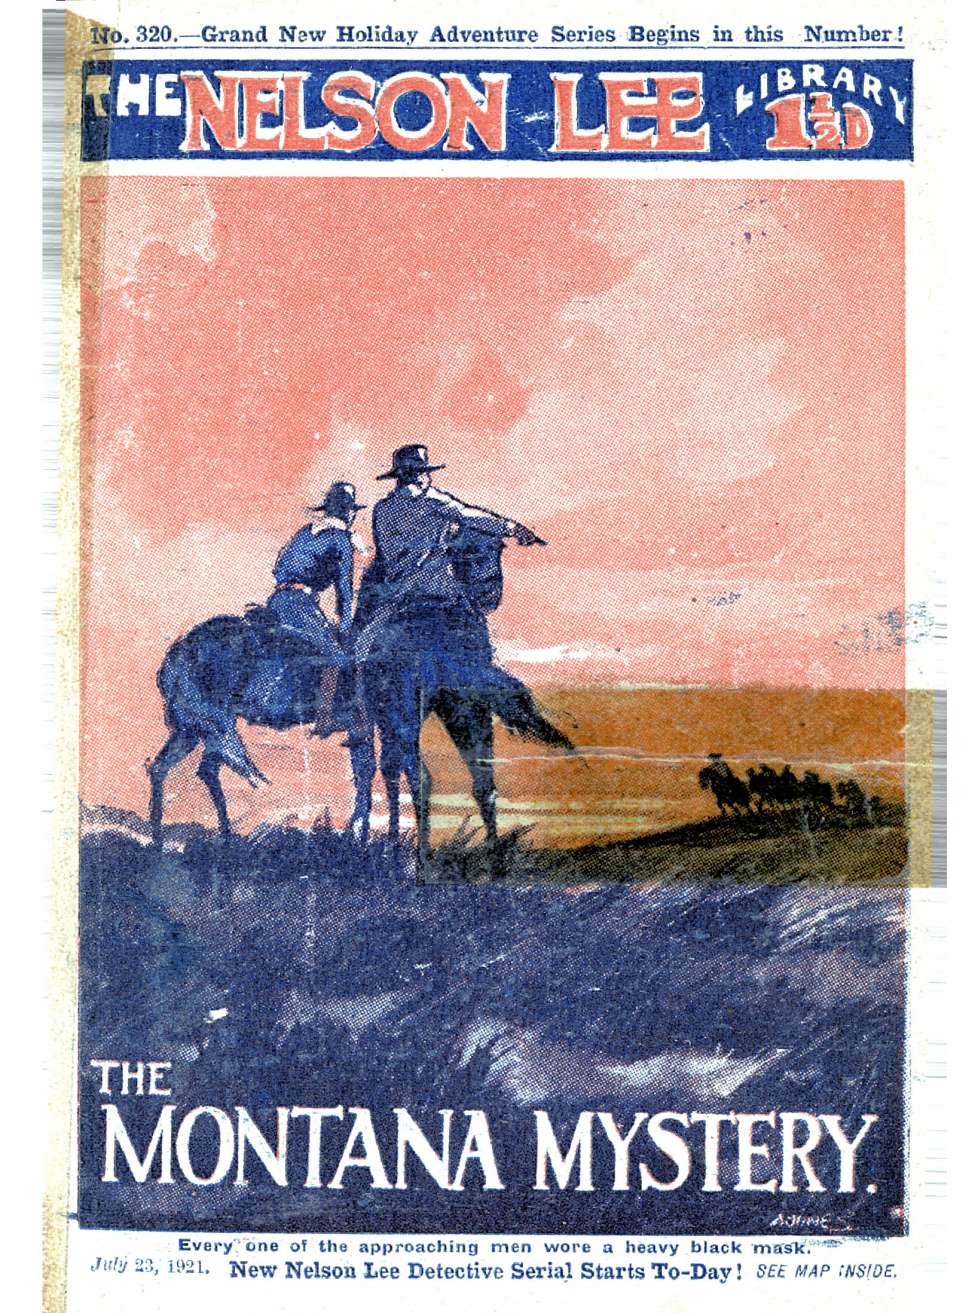 Comic Book Cover For Nelson Lee Library s1 320 - The Montana Mystery